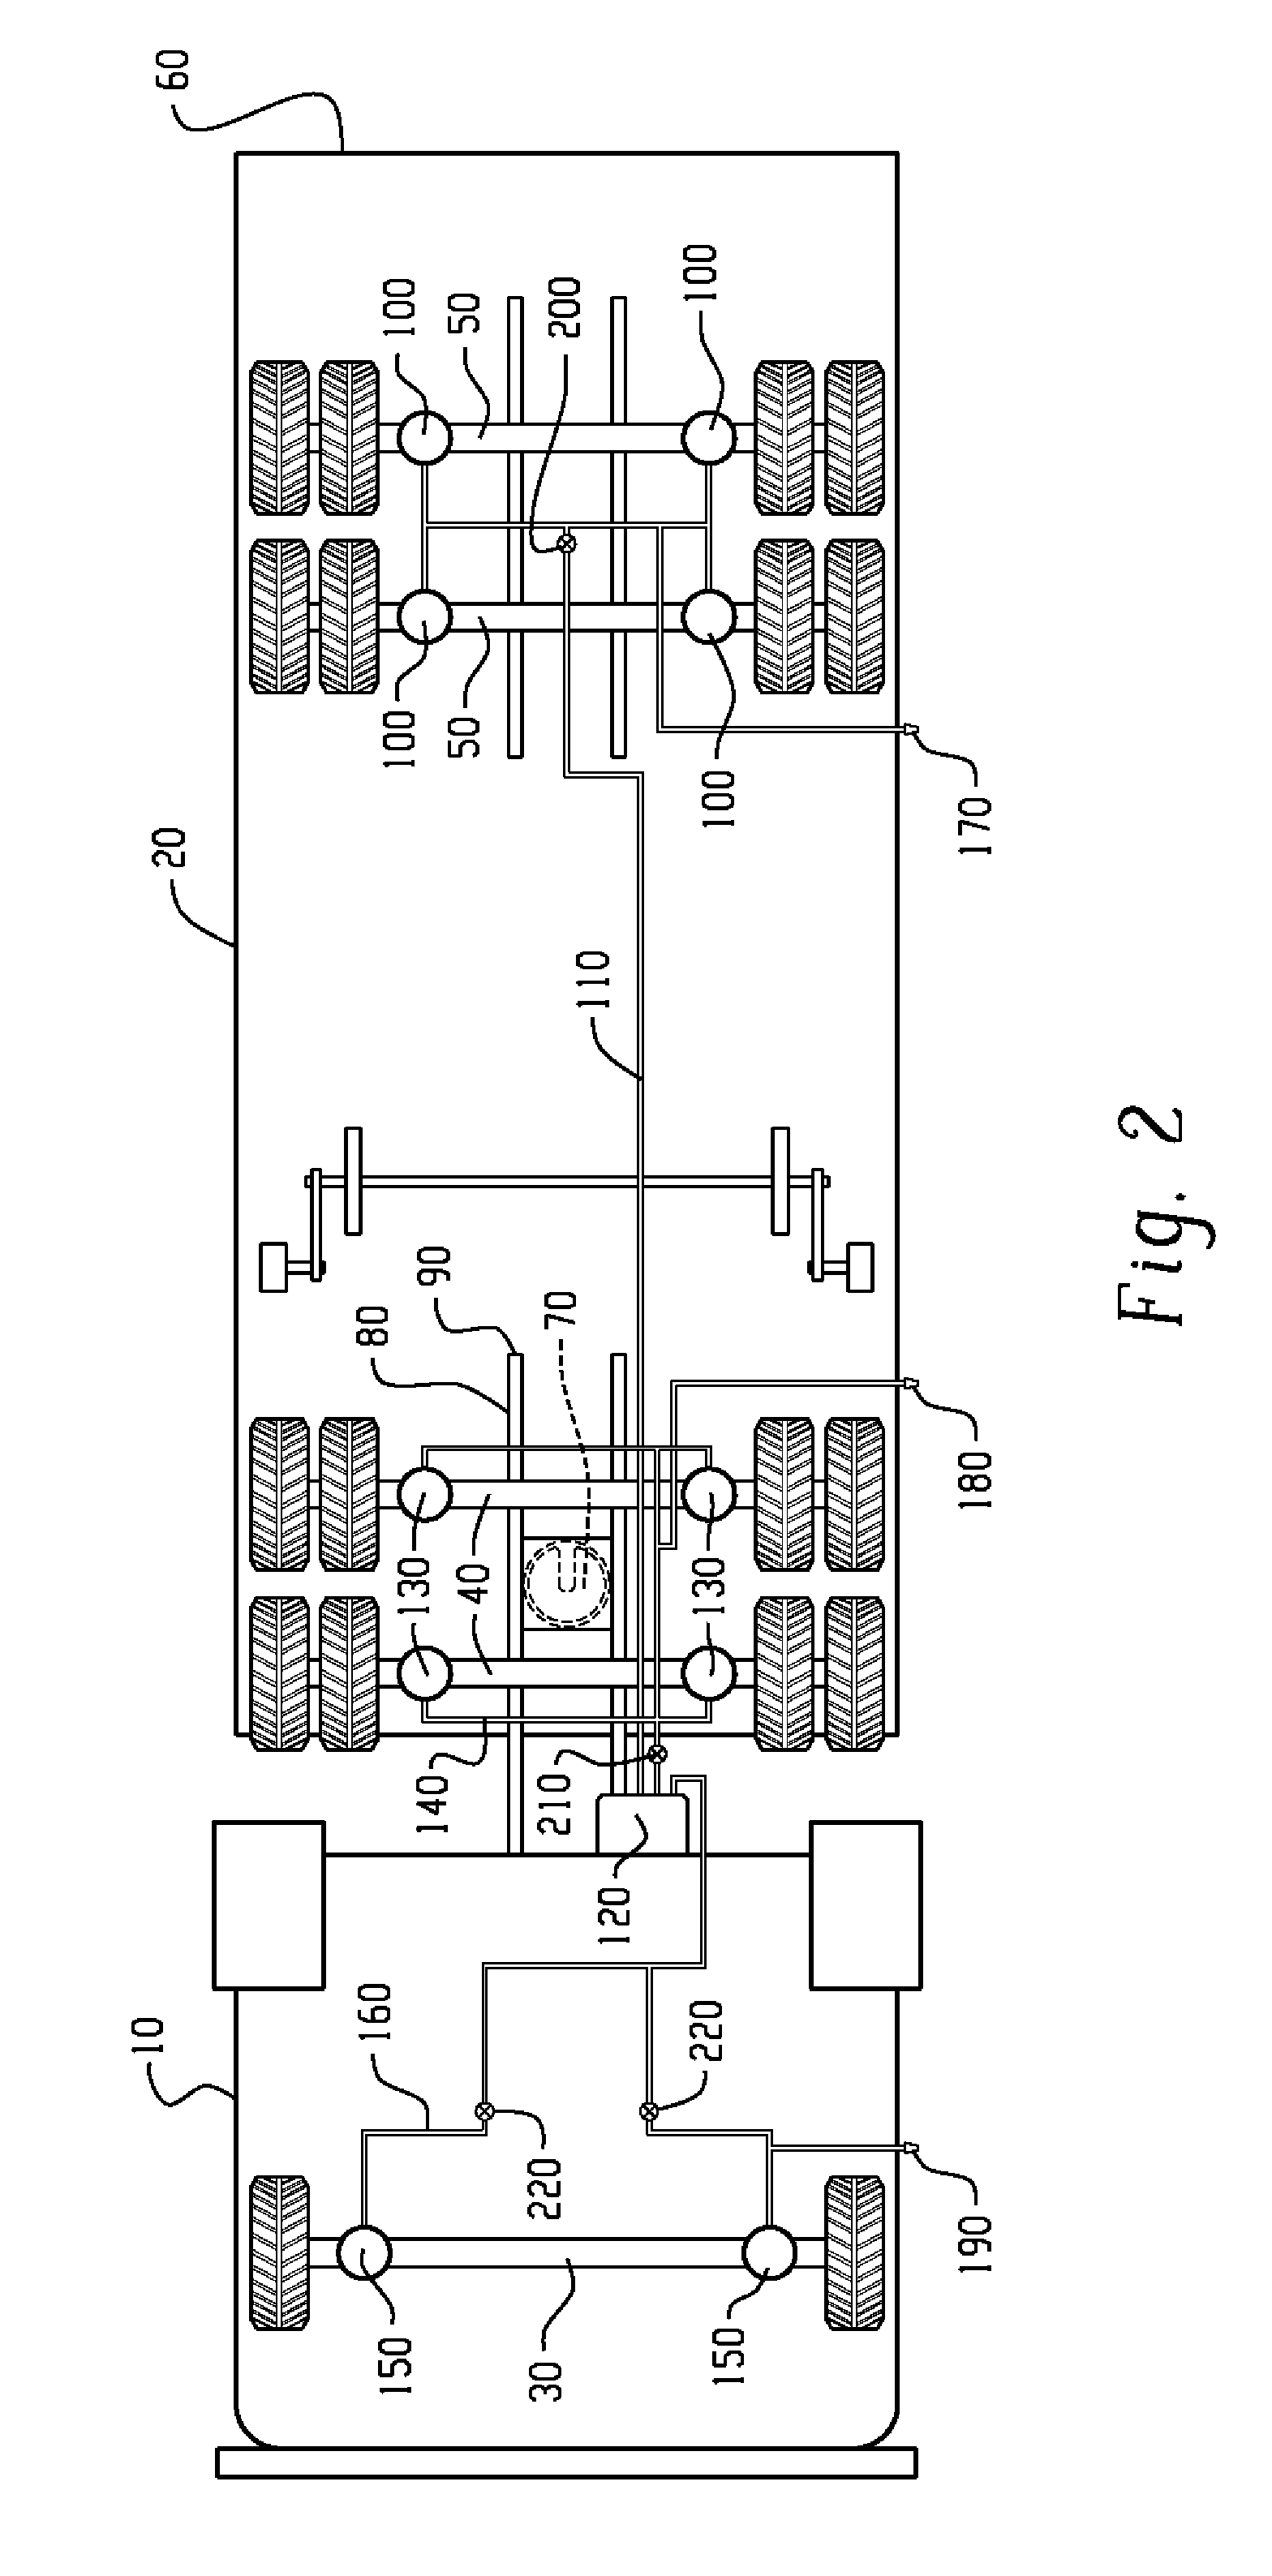 System and method for determining whether the weight of a vehicle equipped with an air-ride suspension exceeds predetermined roadway weight limitations